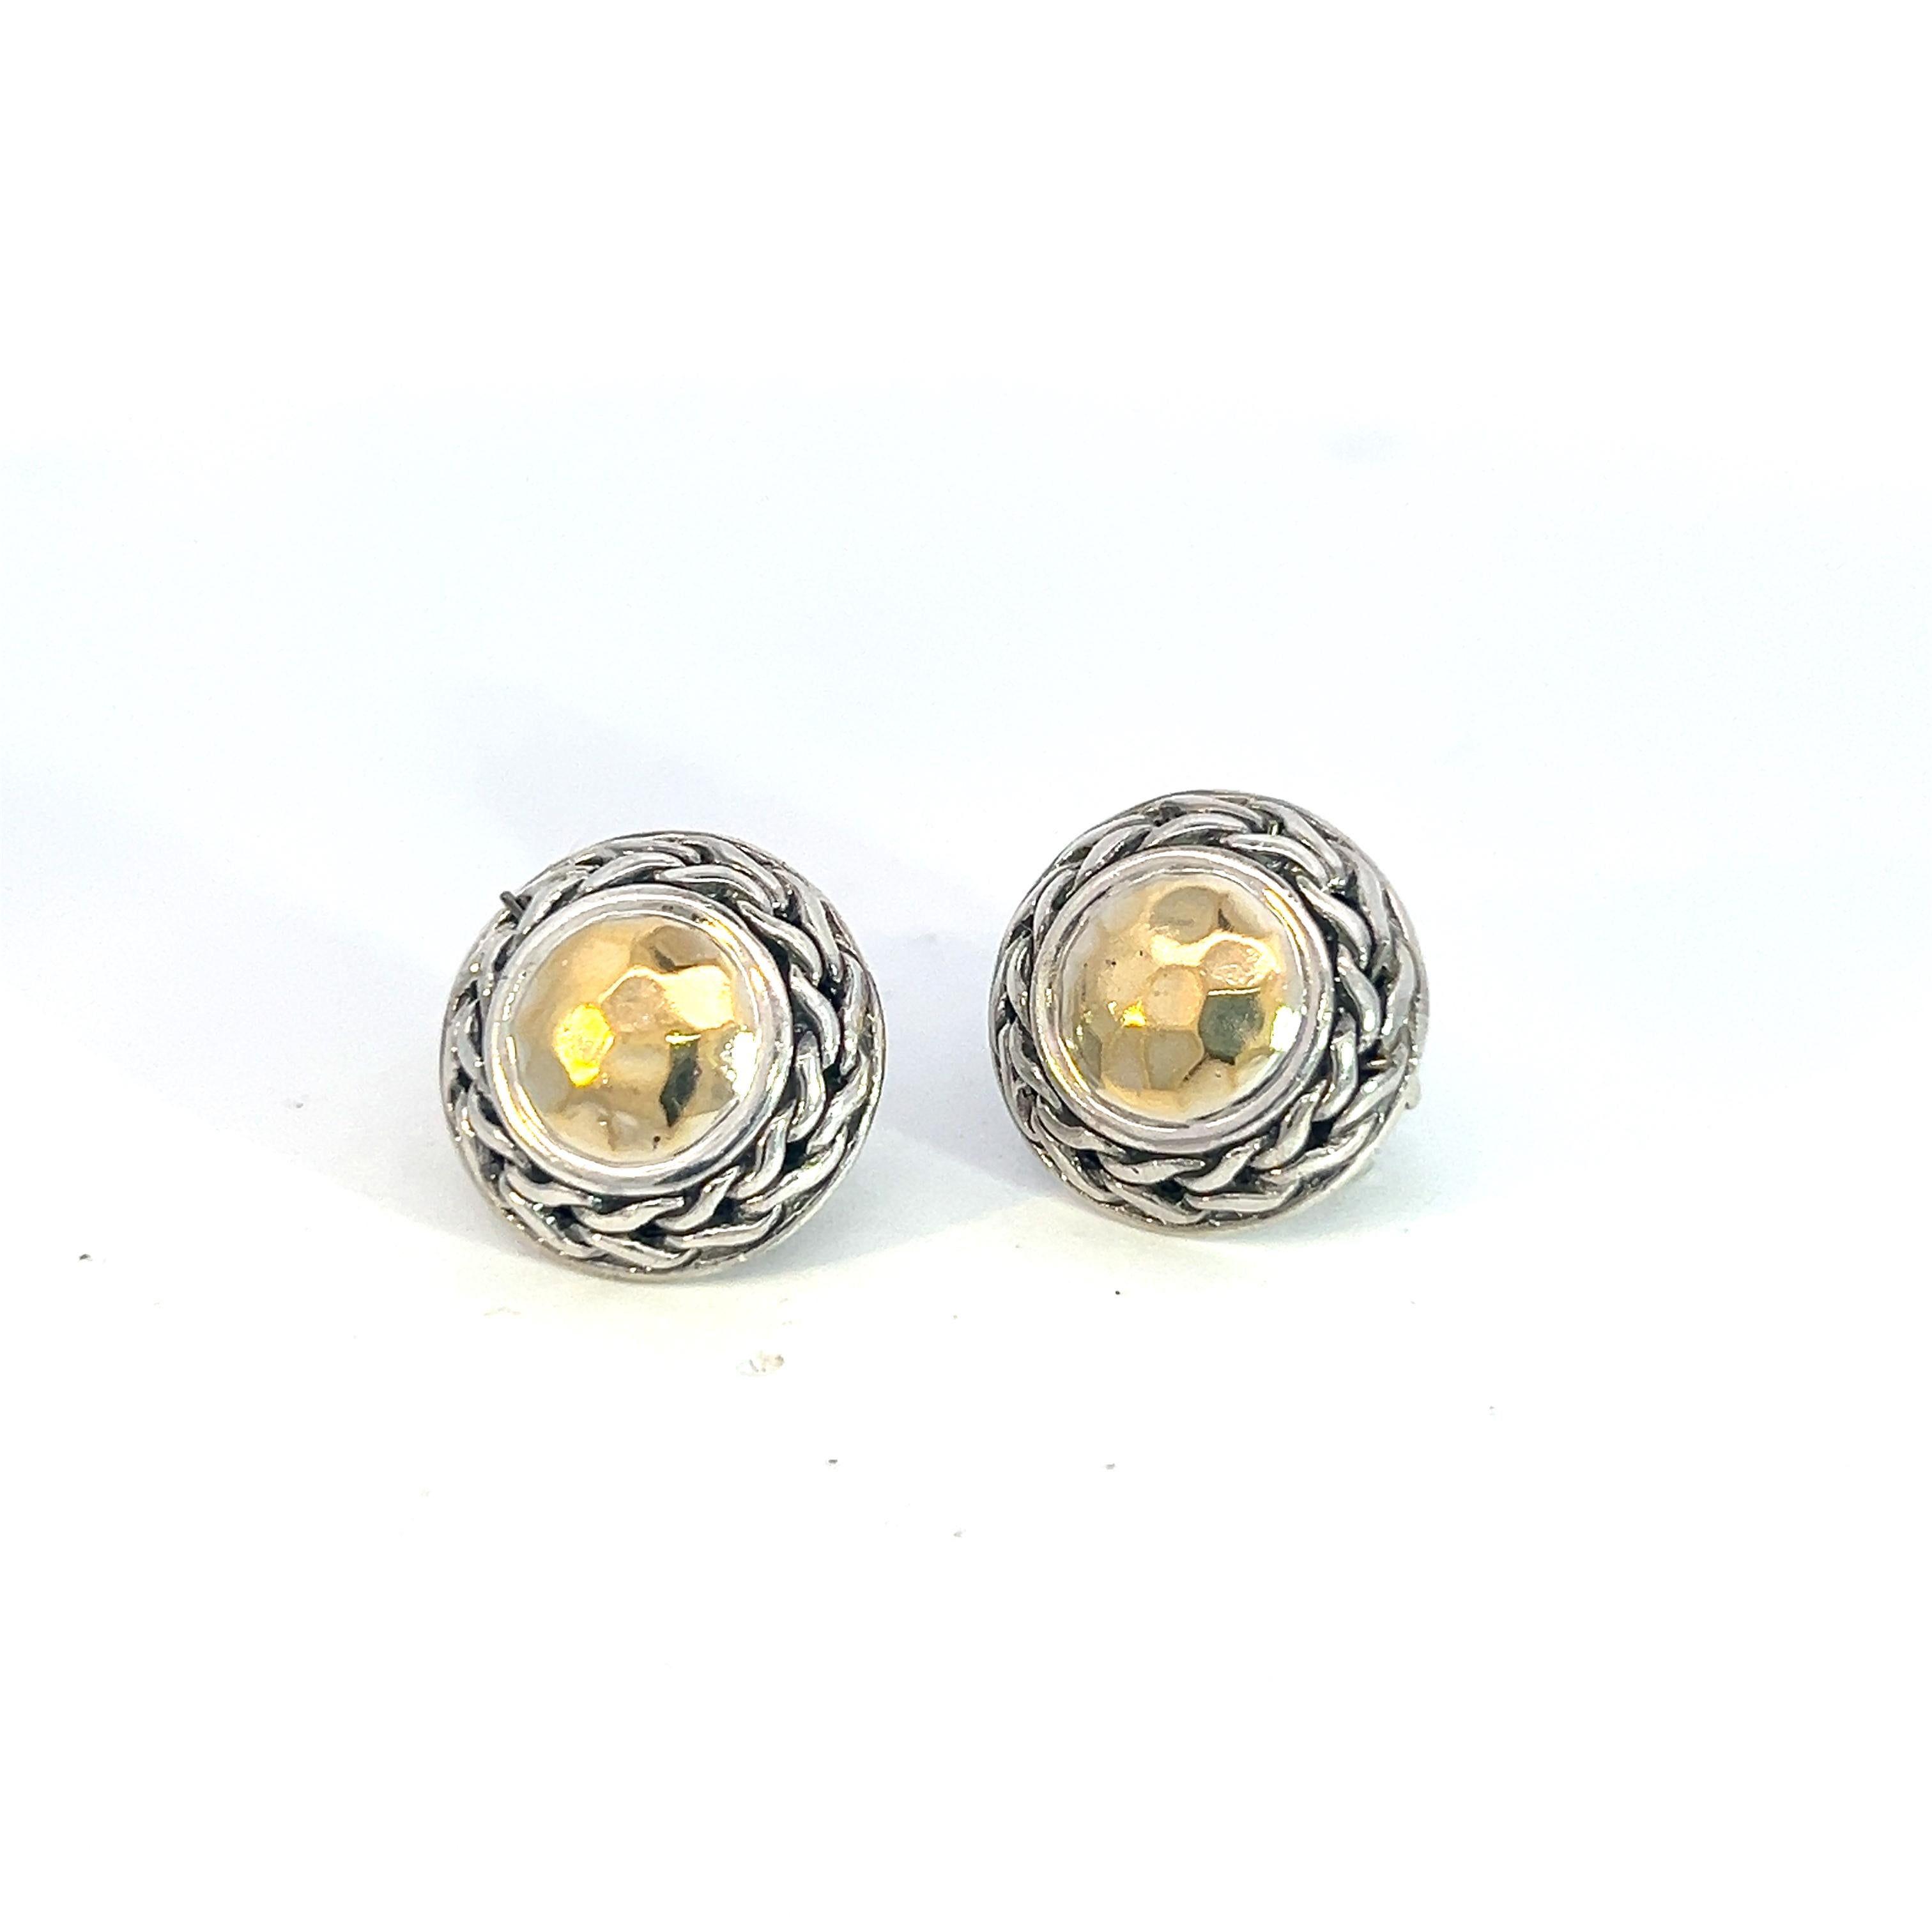 Authentic John Hardy Estate Post Palu Clip-on Earrings Sterling Silver 22k Y Gold JH68

TRUSTED SELLER SINCE 2002

PLEASE SEE OUR HUNDREDS OF POSITIVE FEEDBACKS FROM OUR CLIENTS!!

FREE SHIPPING!!

DETAILS
Style: Post Palu Clip-on Earrings
Metal: